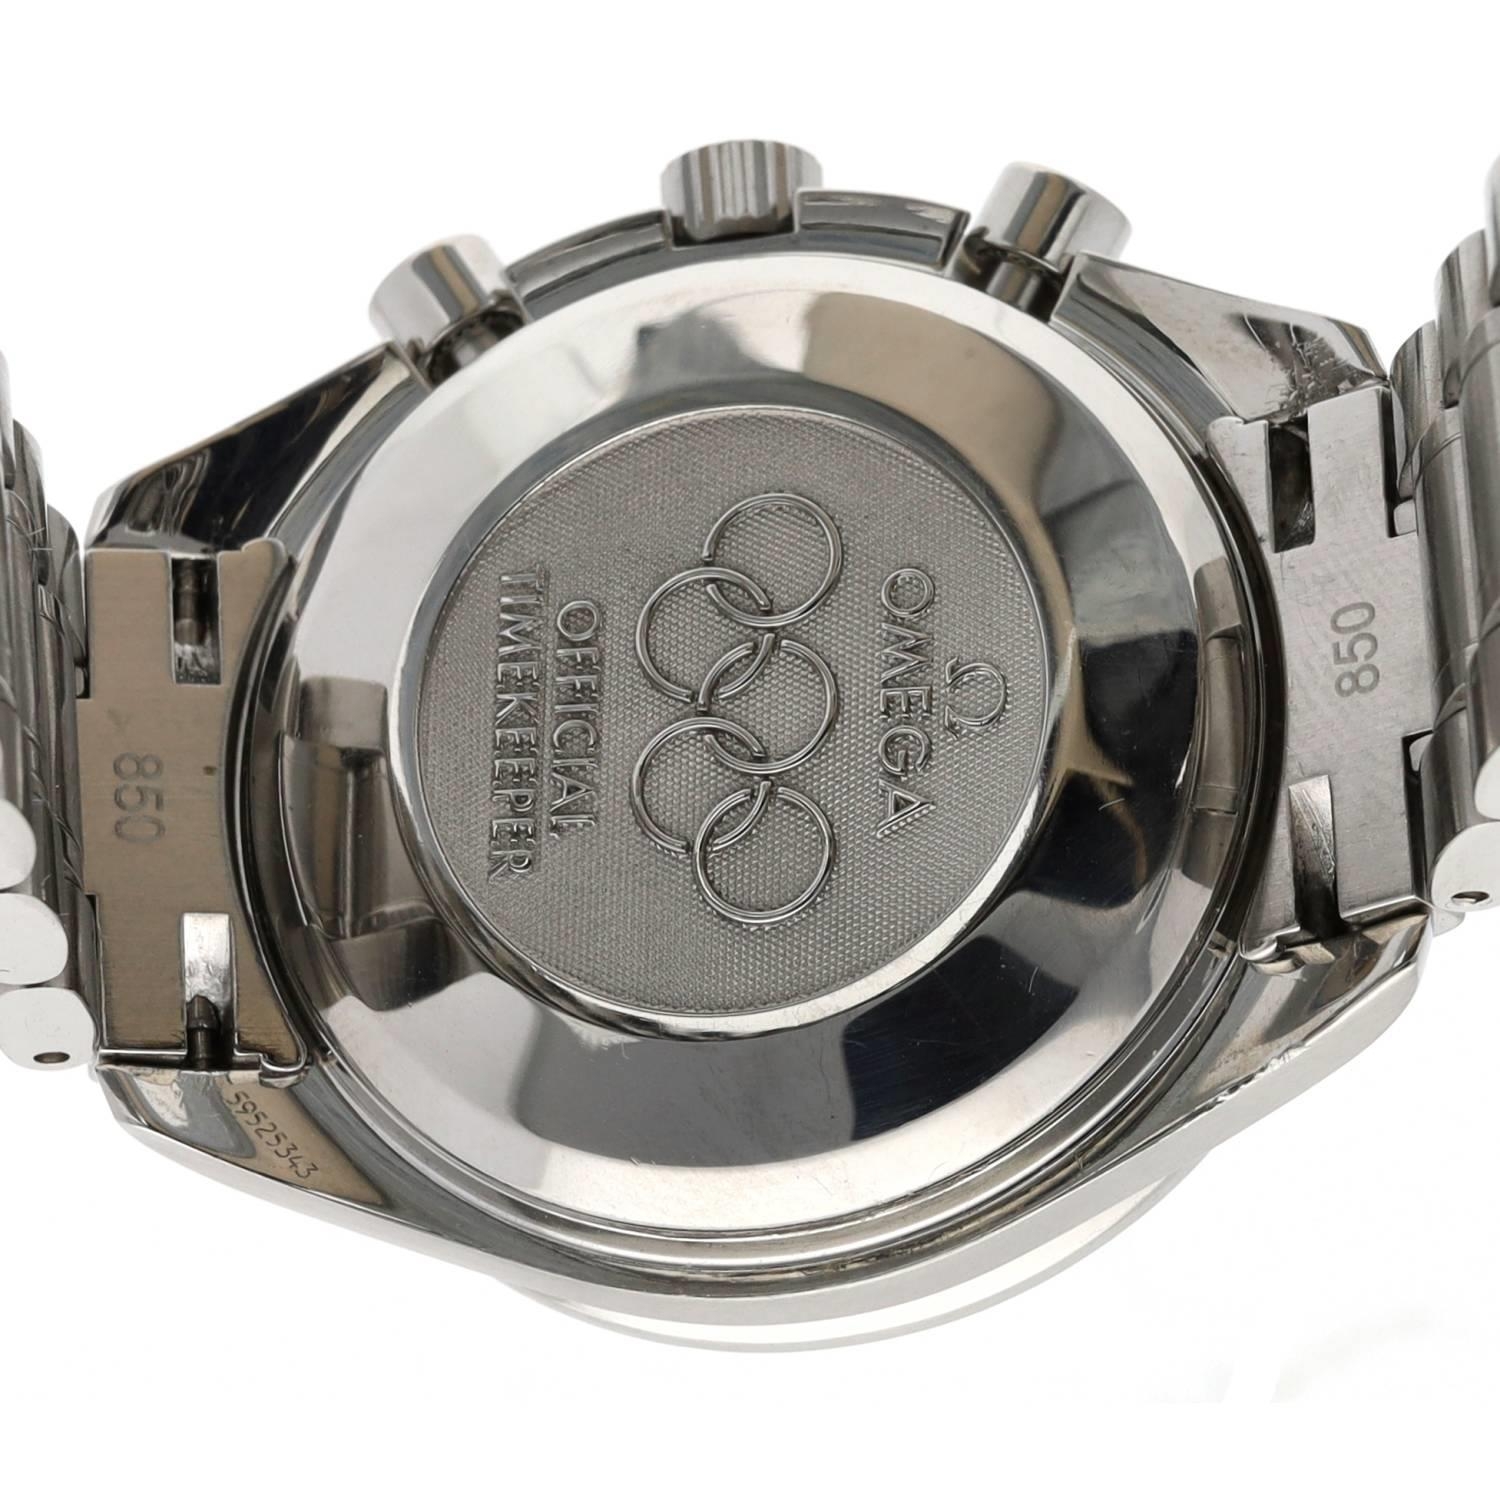 Omega Speedmaster Olympic Edition Chronograph automatic stainless steel gentleman's wristwatch, - Image 4 of 5